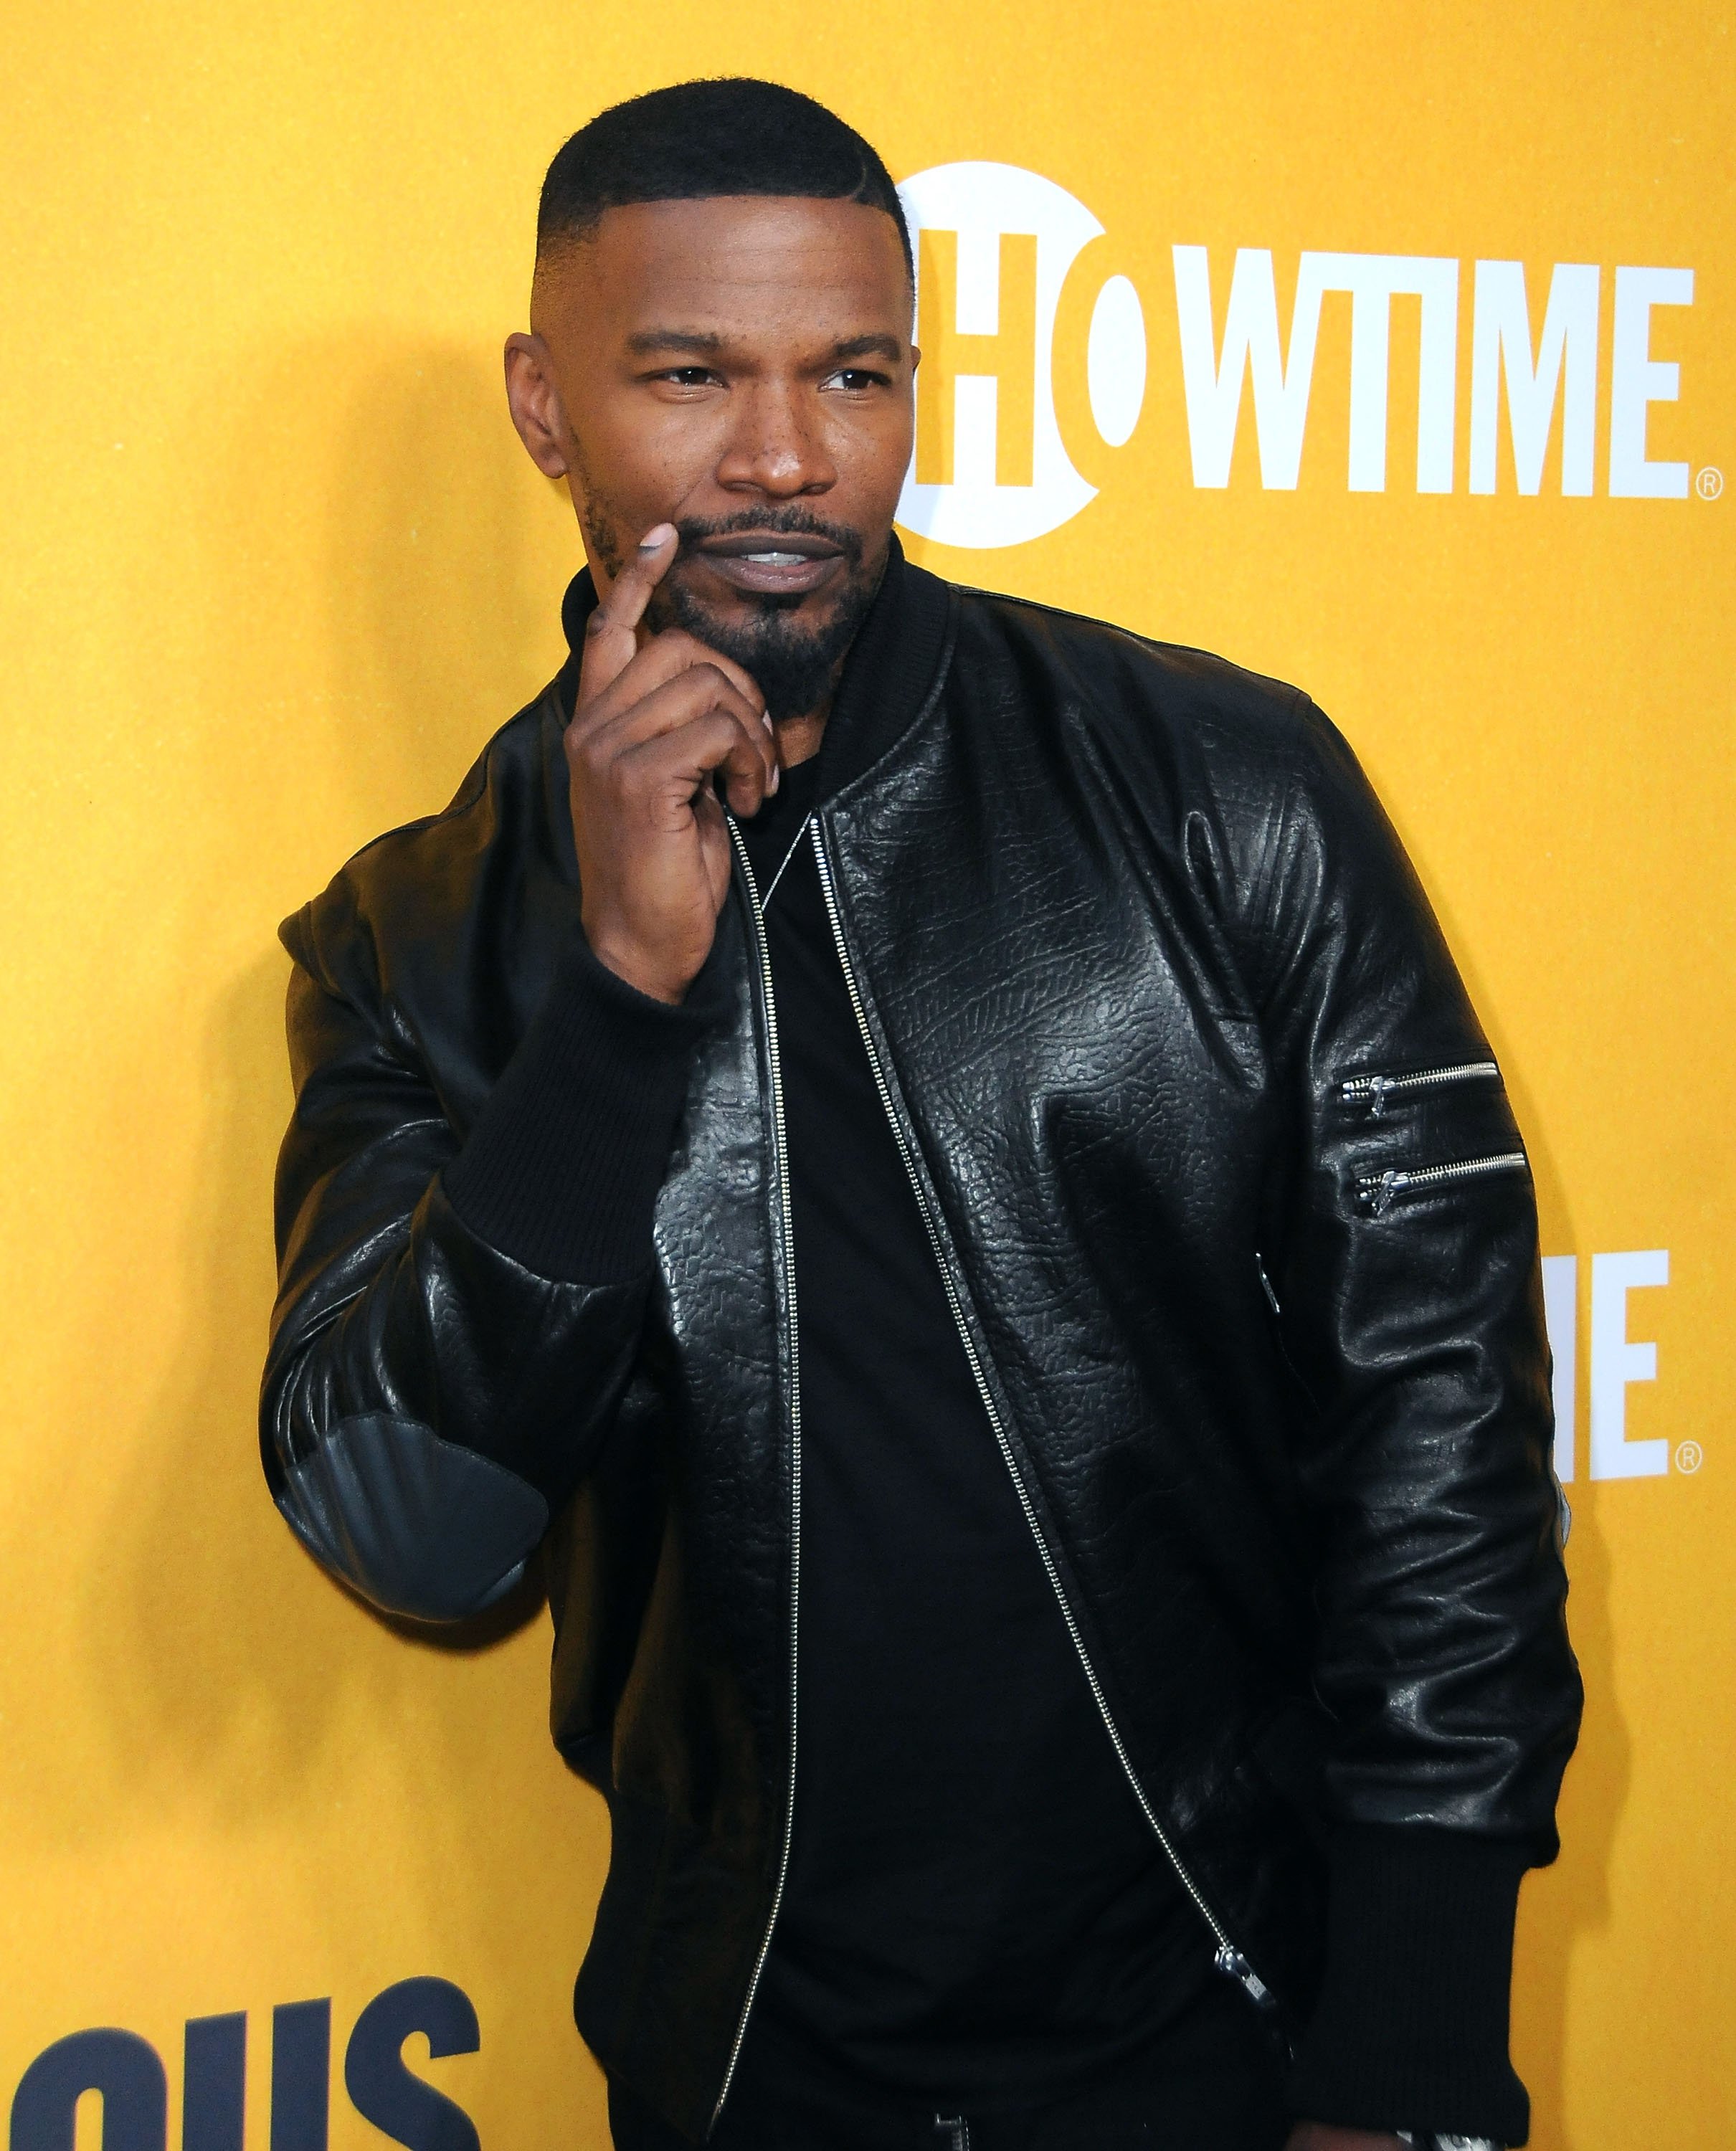 Jamie Foxx pictured at the premiere of “White Famous” on September 27, 2017 in West Hollywood, California. | Source: Getty Images